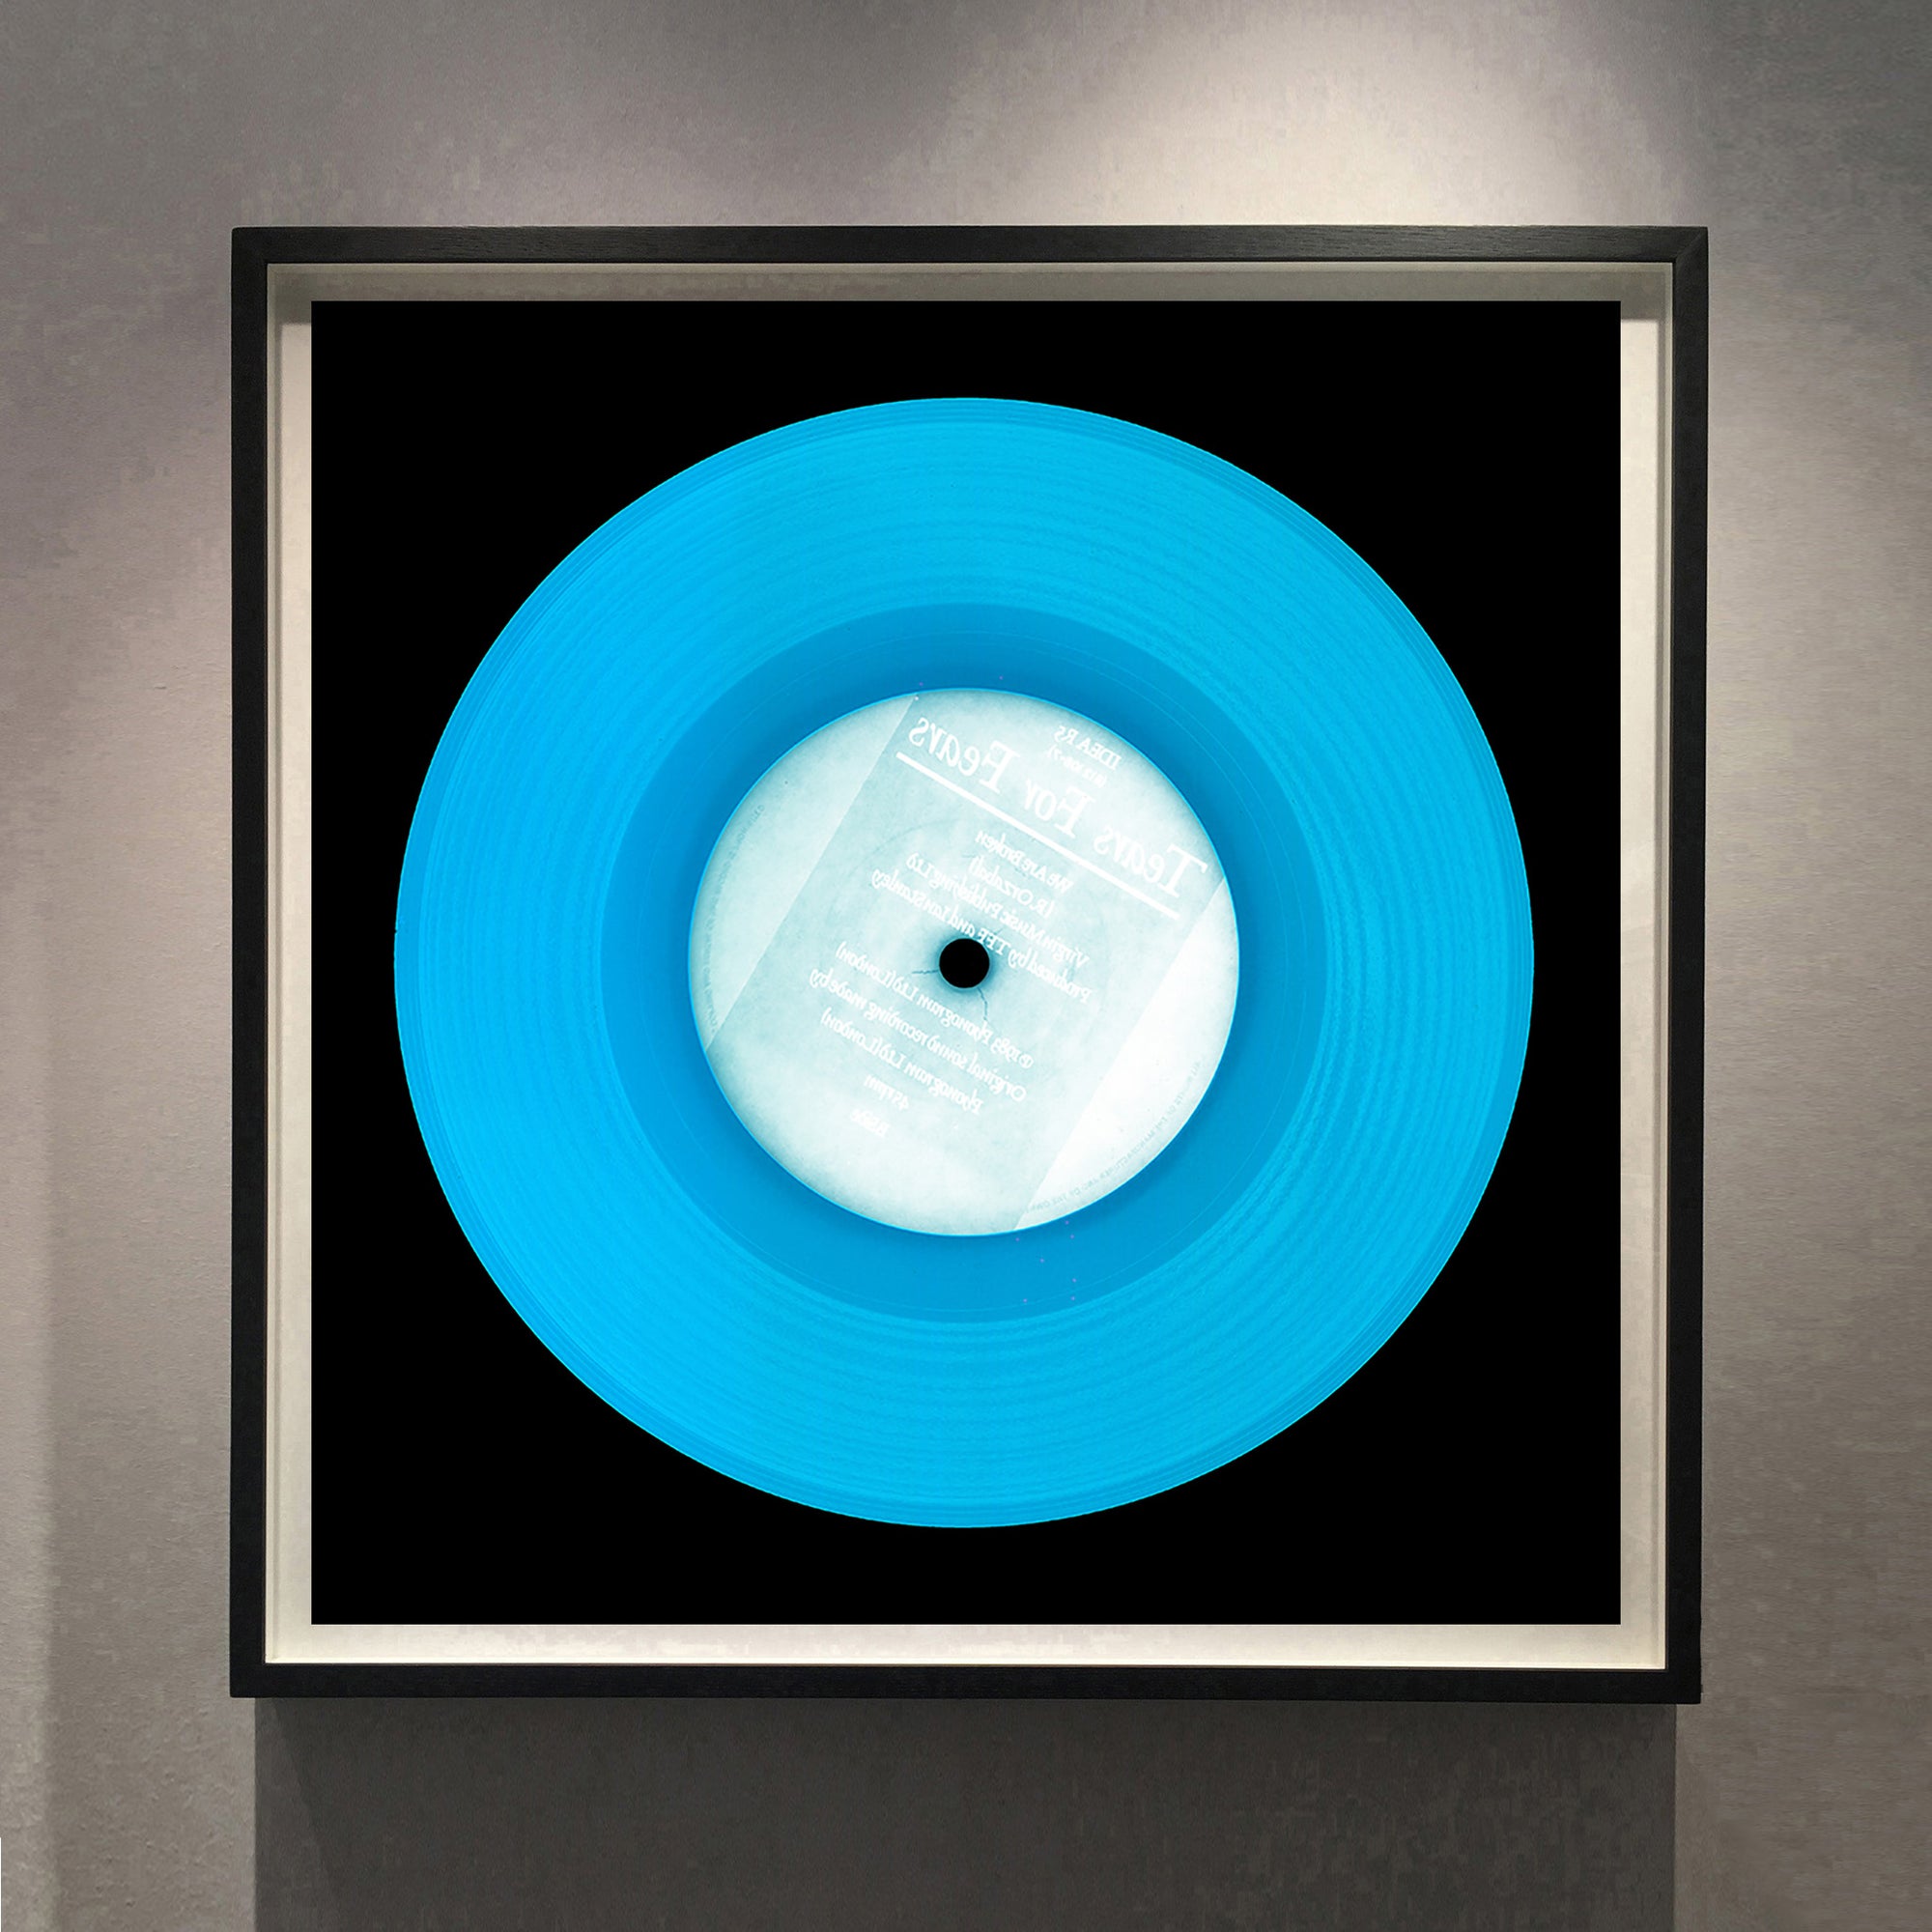 Vinyl Collection 'Idea' (Cyan), 2014. Acclaimed contemporary photographers, Richard Heeps and Natasha Heidler have collaborated to make this beautifully mesmerising collection. A celebration of the vinyl record and analogue technology, which reflects the artists practice within photography.